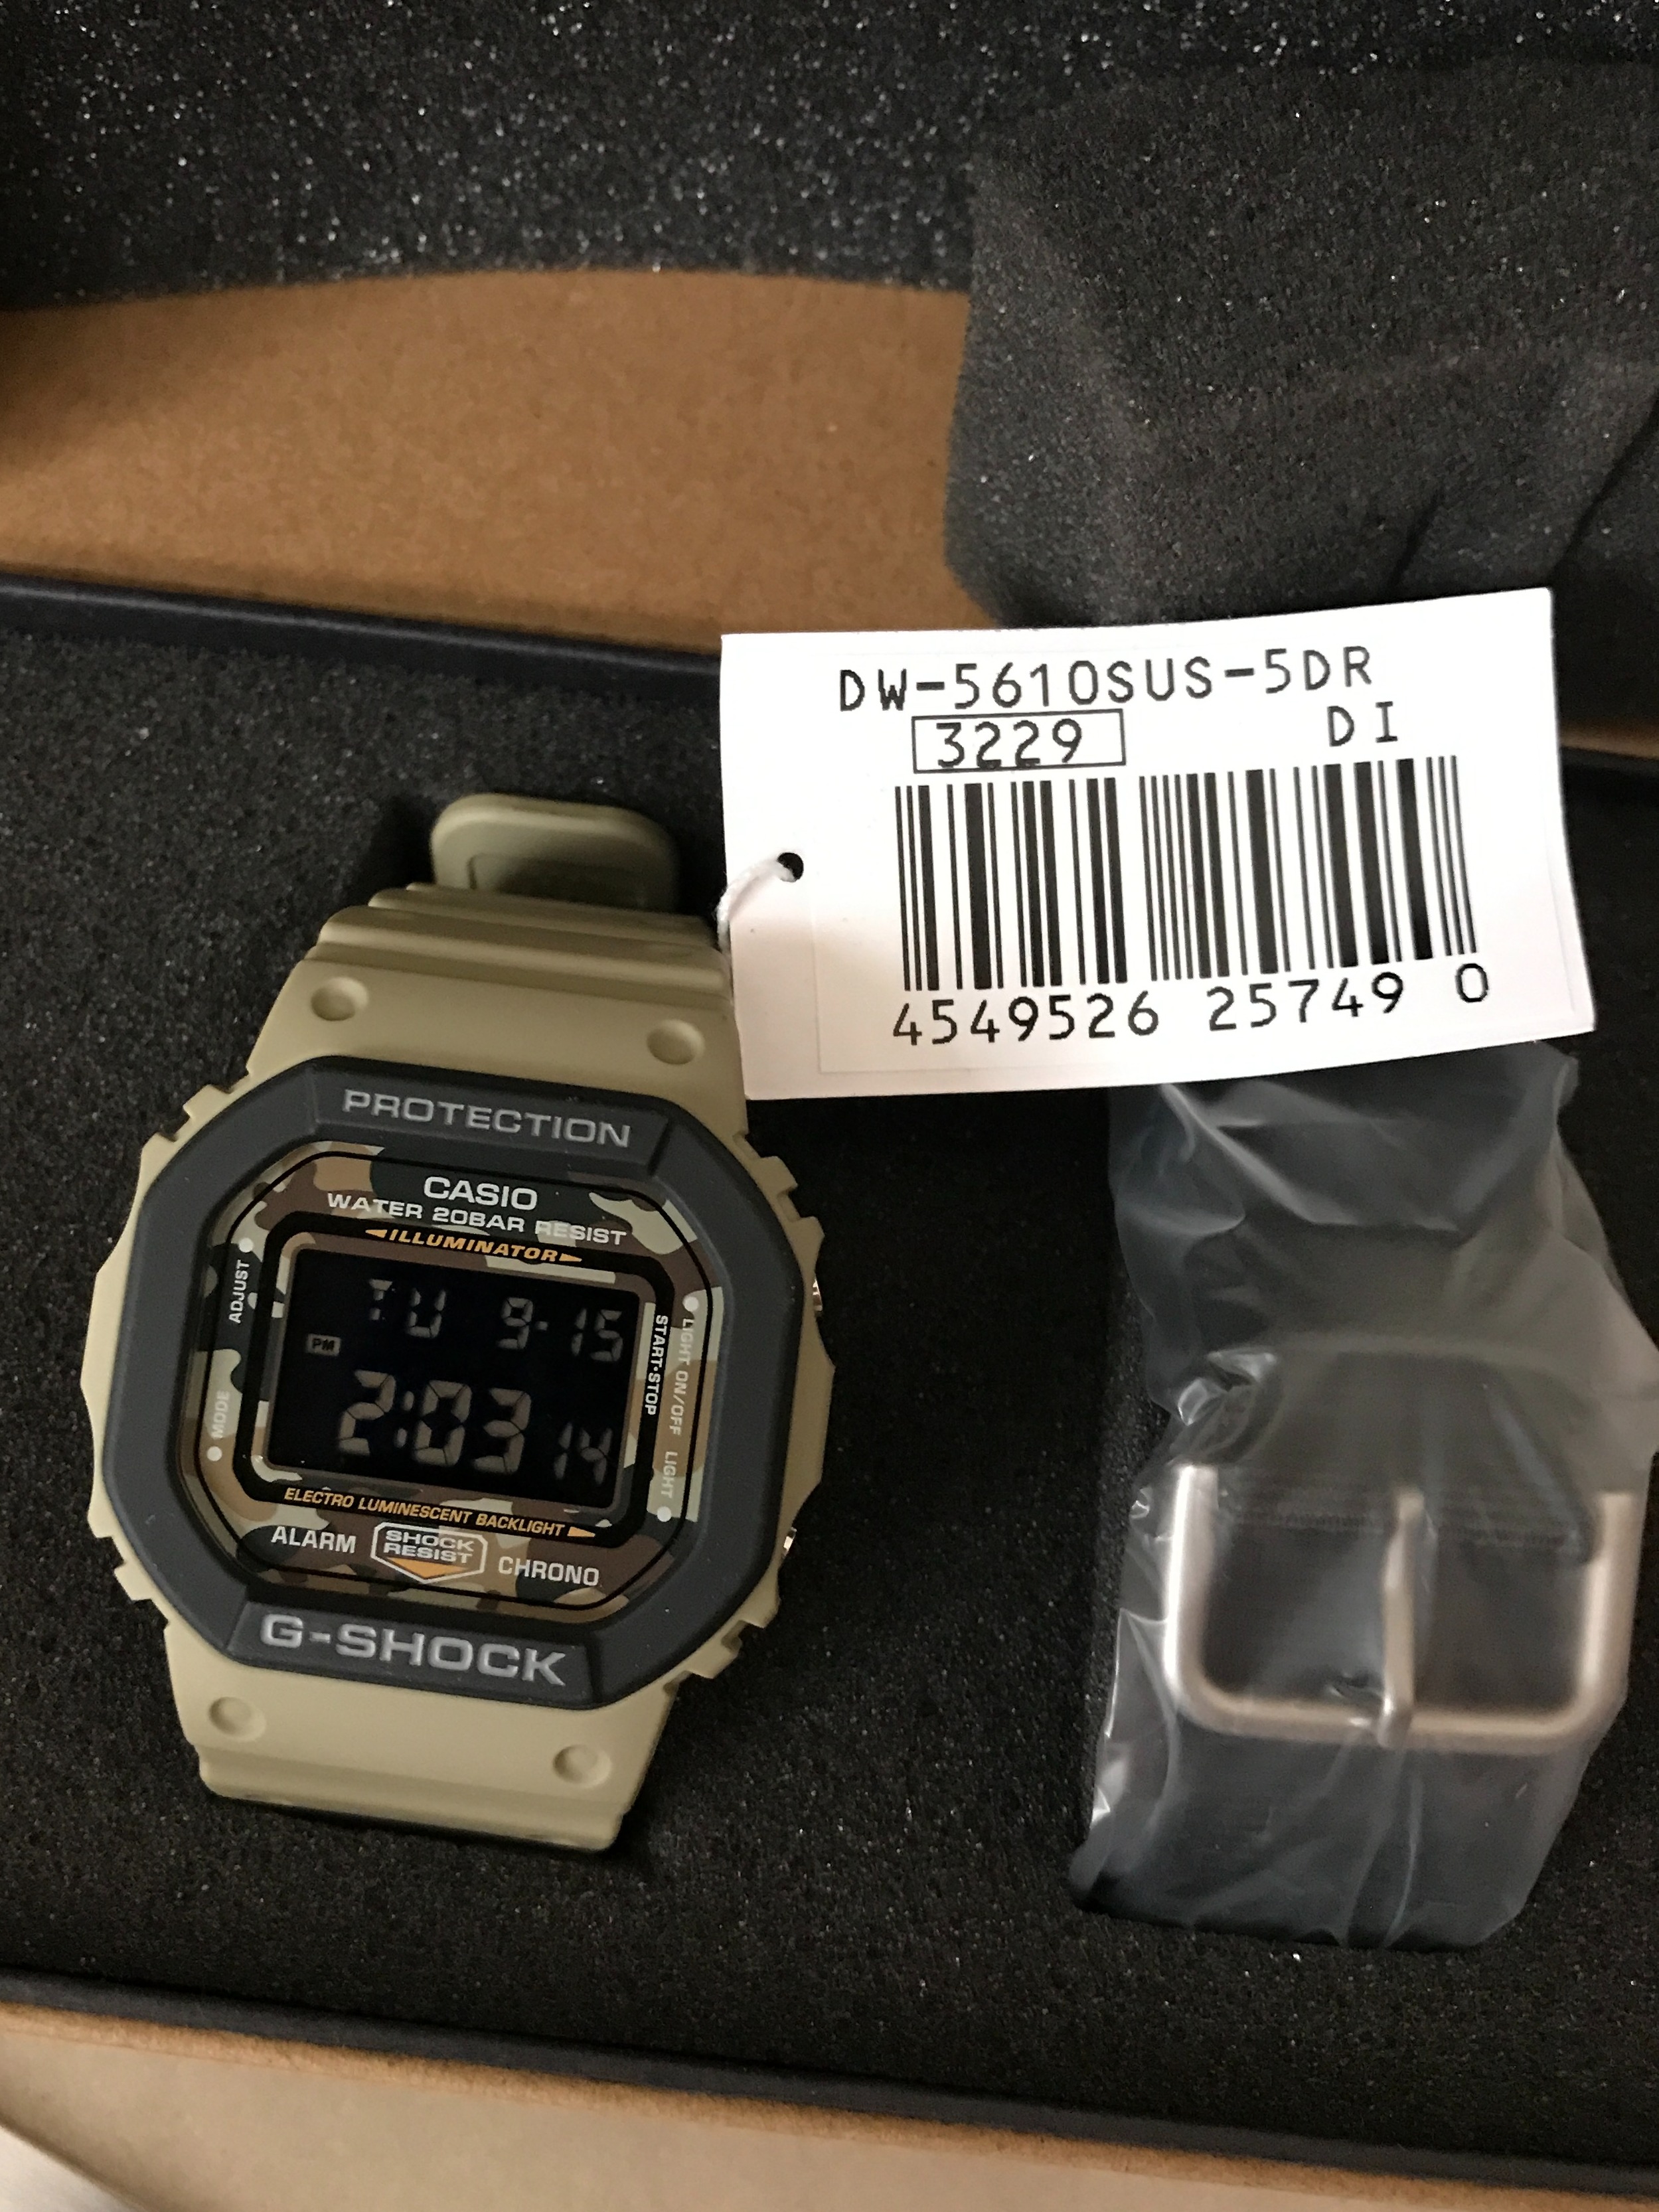 New Arrival Casio G-Shock DW-5610SUS-5 Digital Black Cloth Band and Brown  Resin Band Mens' Sports Watch Special Bi-Color Bezel DW-5610 DW-5600 DW5610  Lazada Singapore